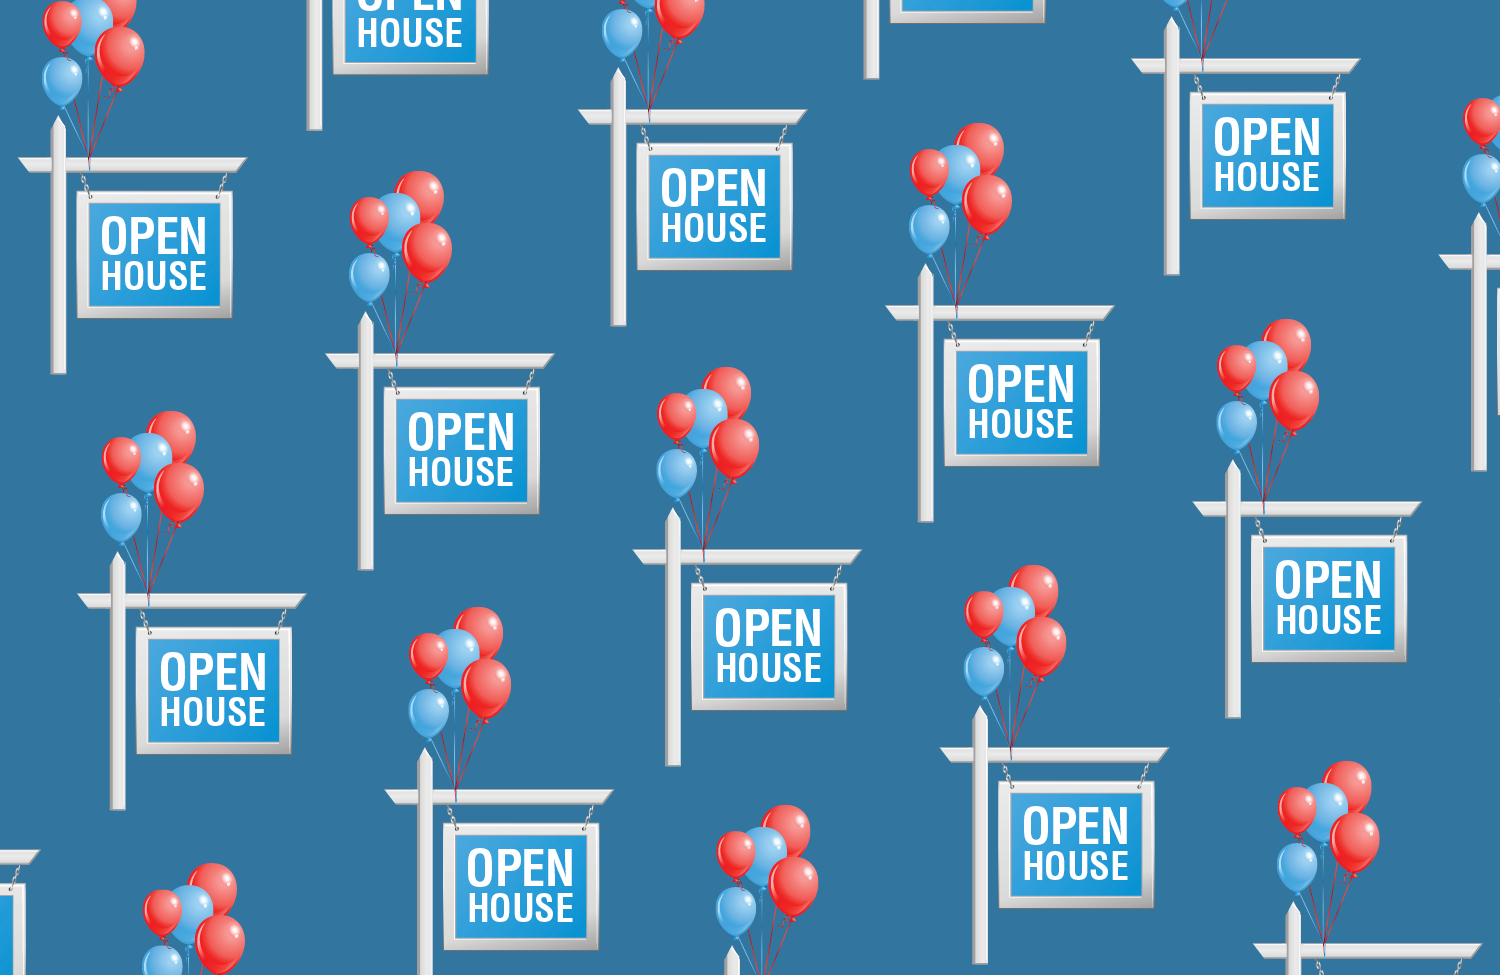 Tips for a Successful Open House